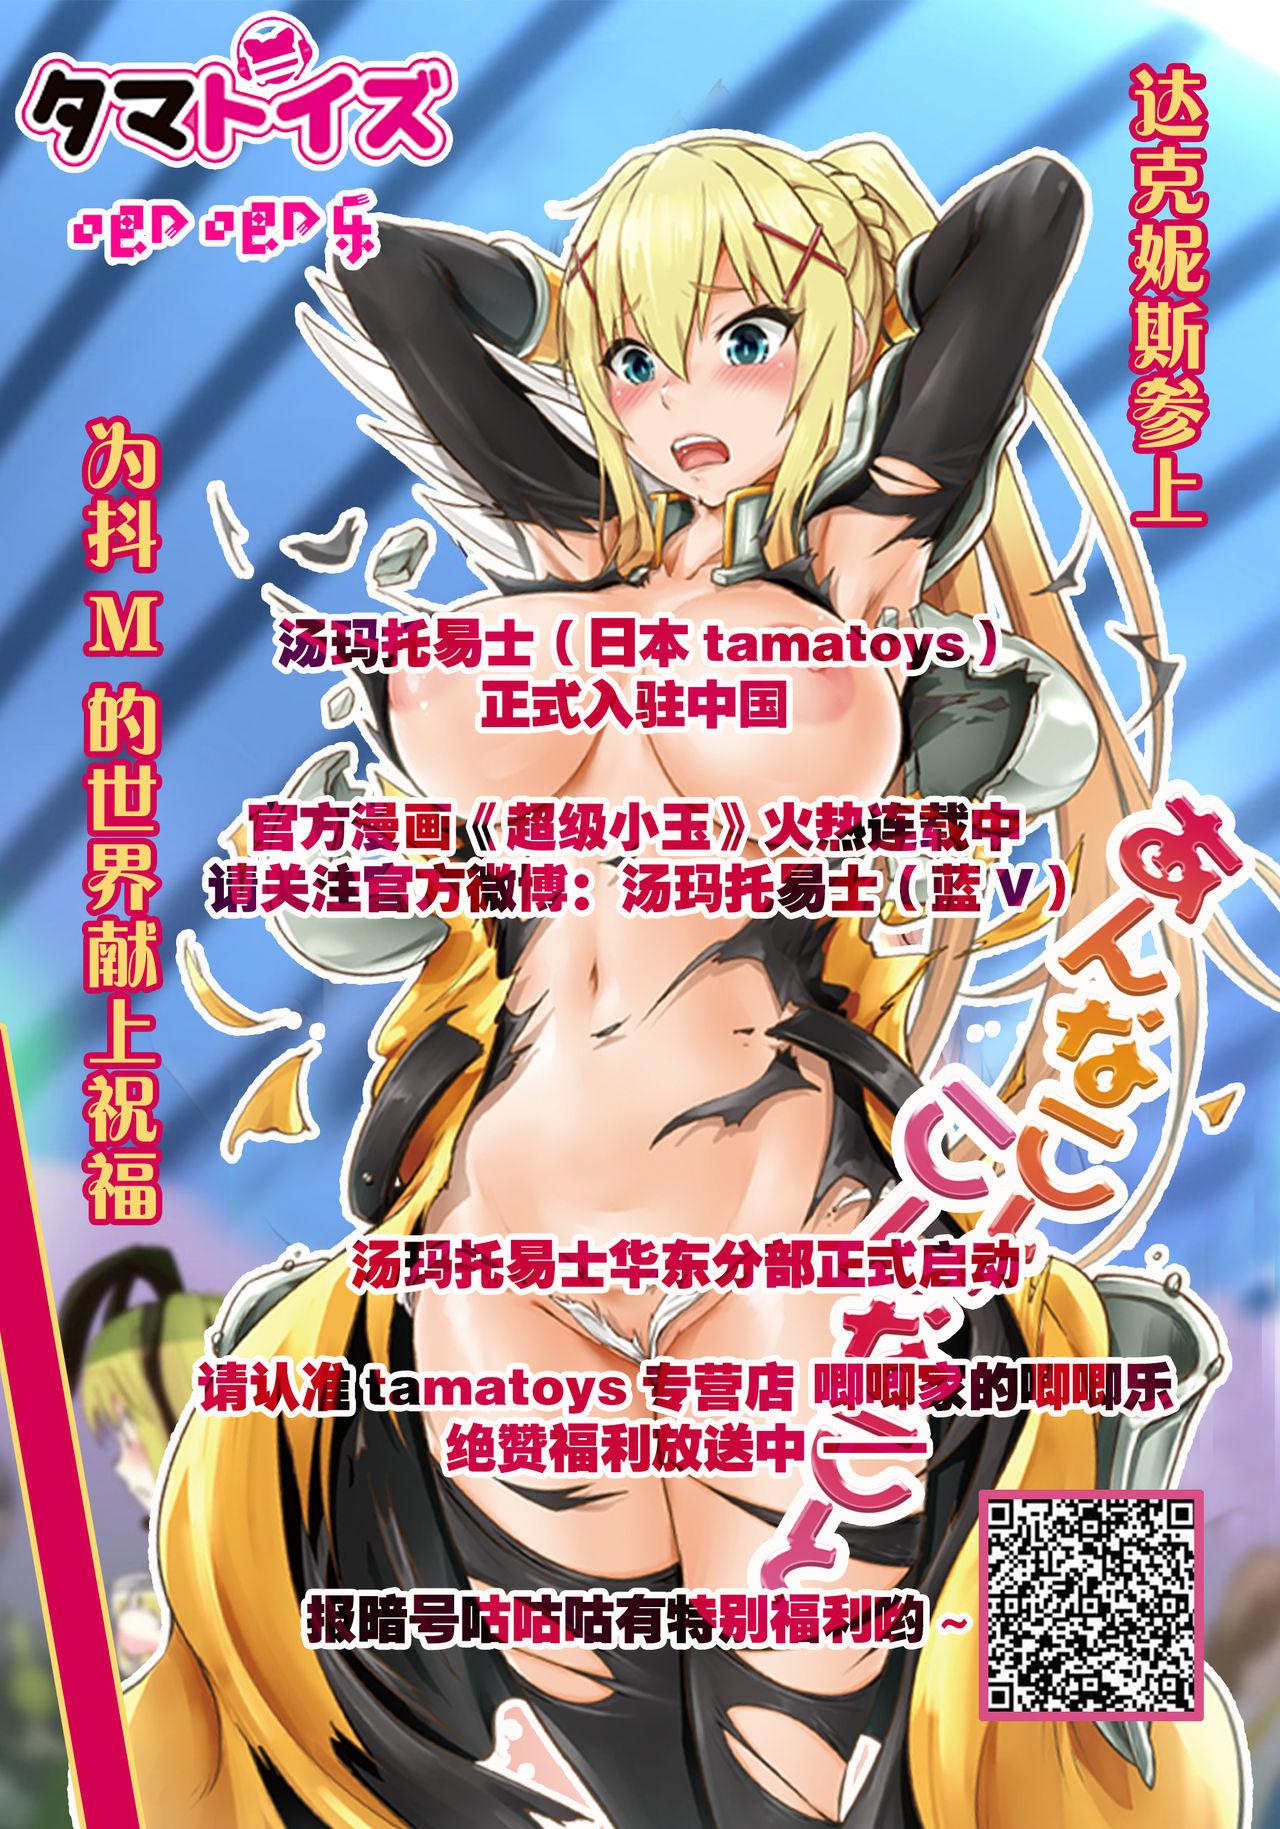 Erotic SHG:05 - Fate kaleid liner prisma illya Real Couple - Page 27